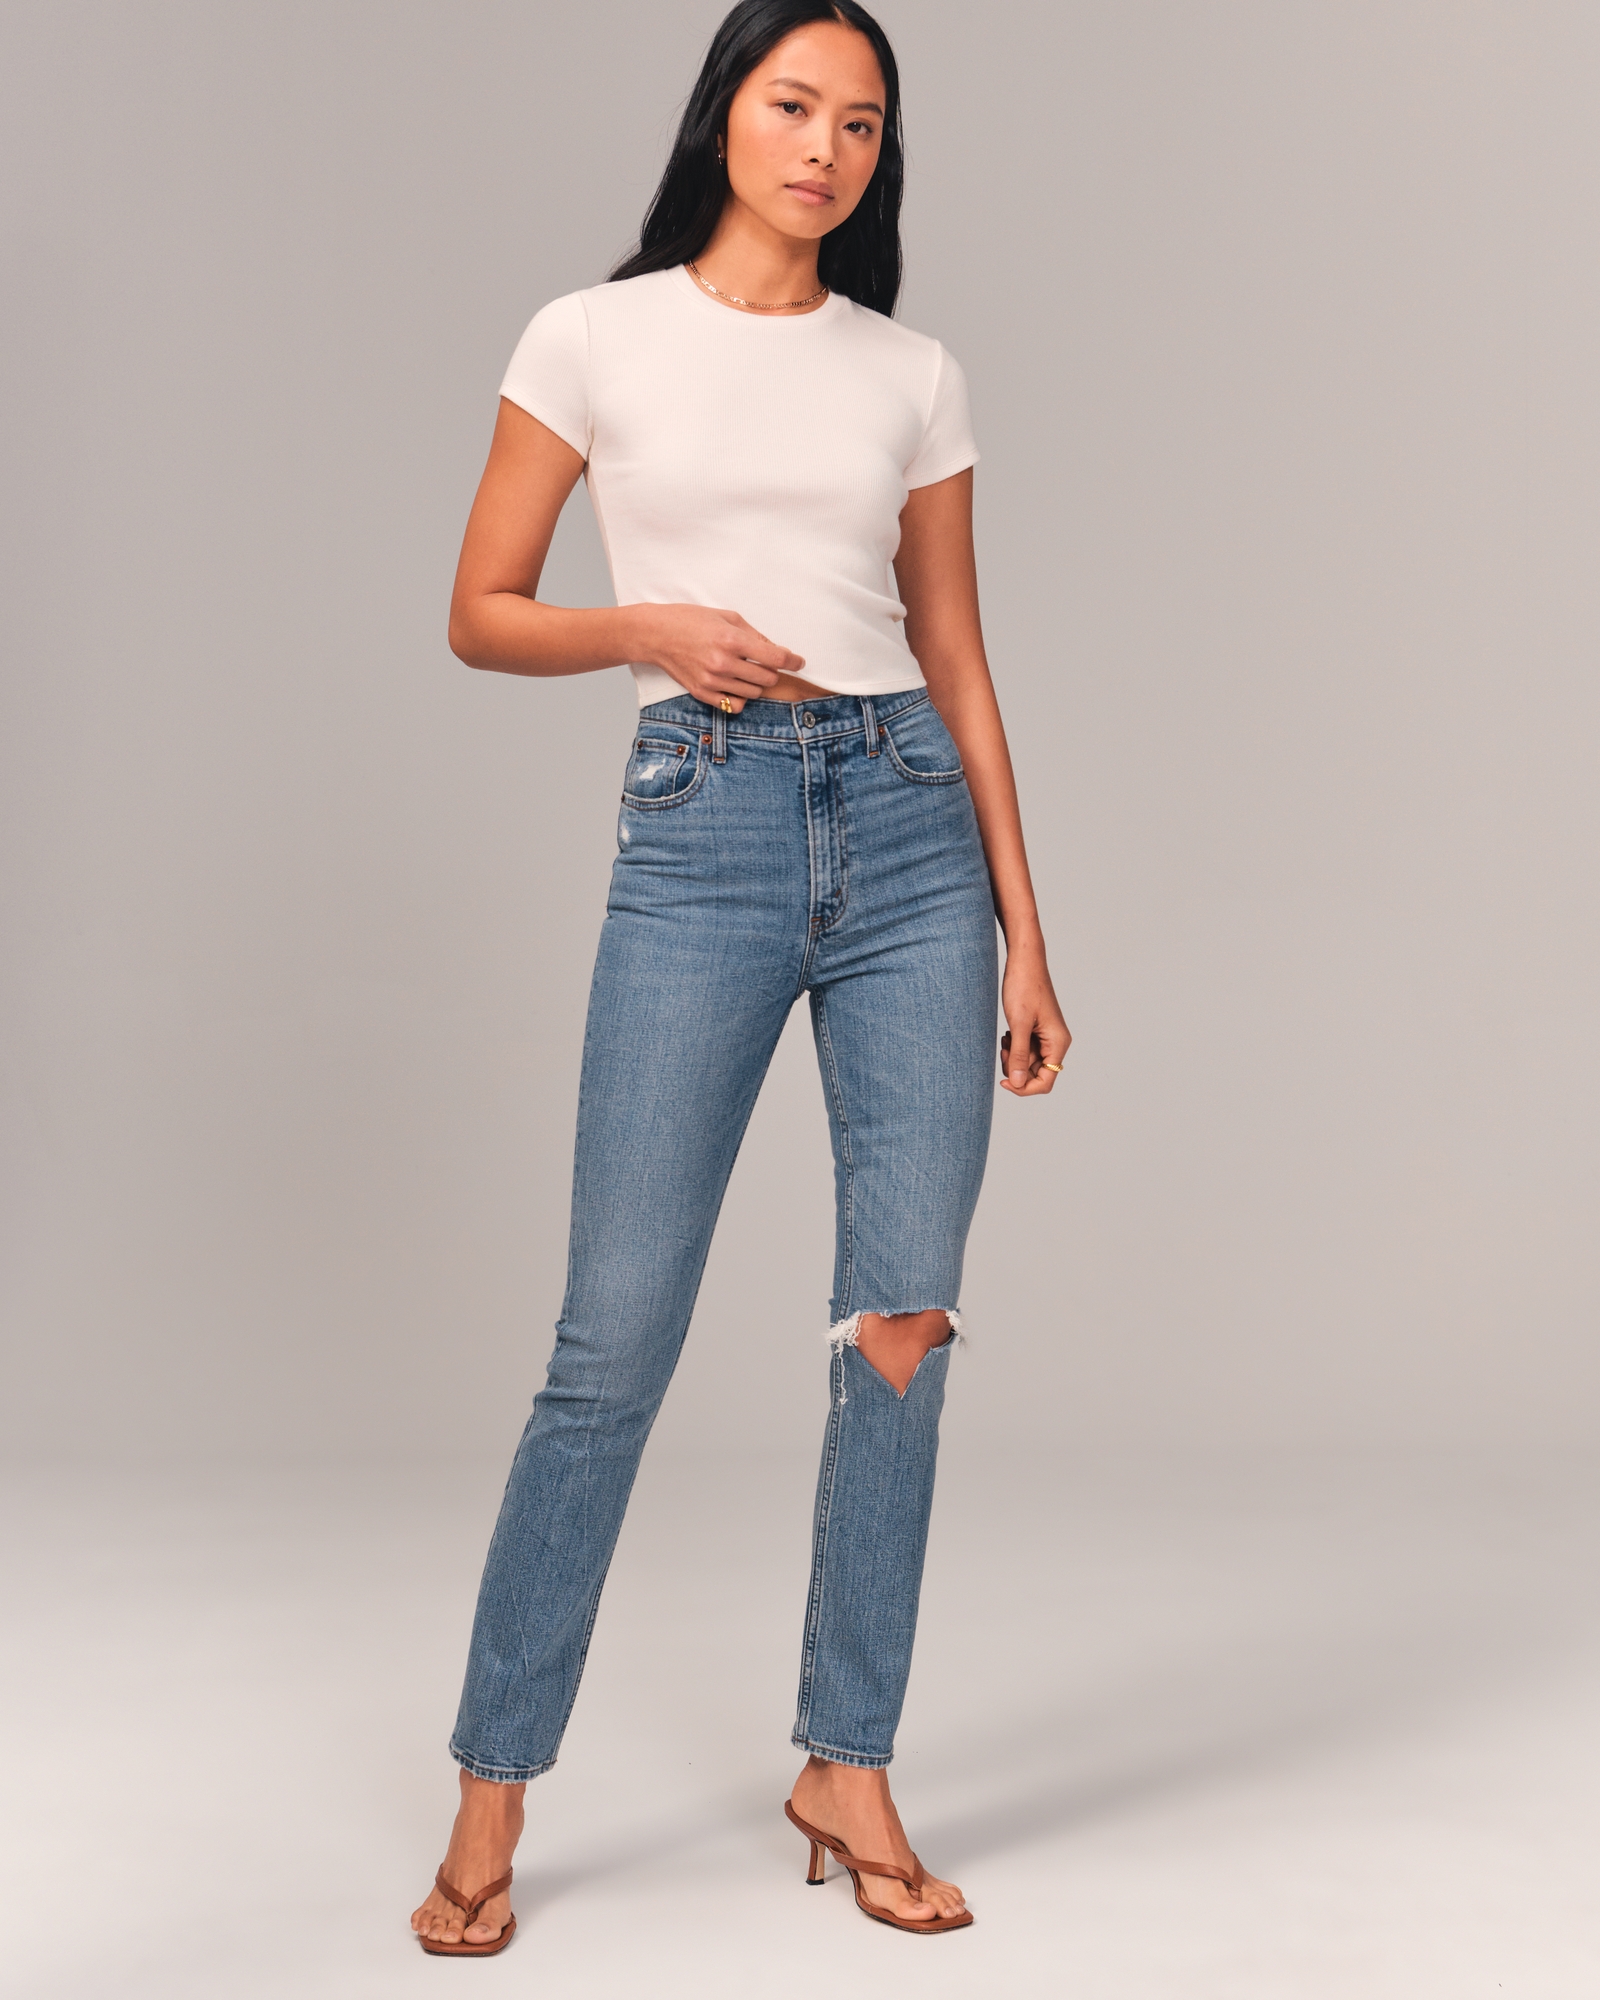 Straight fit high-waist jeans